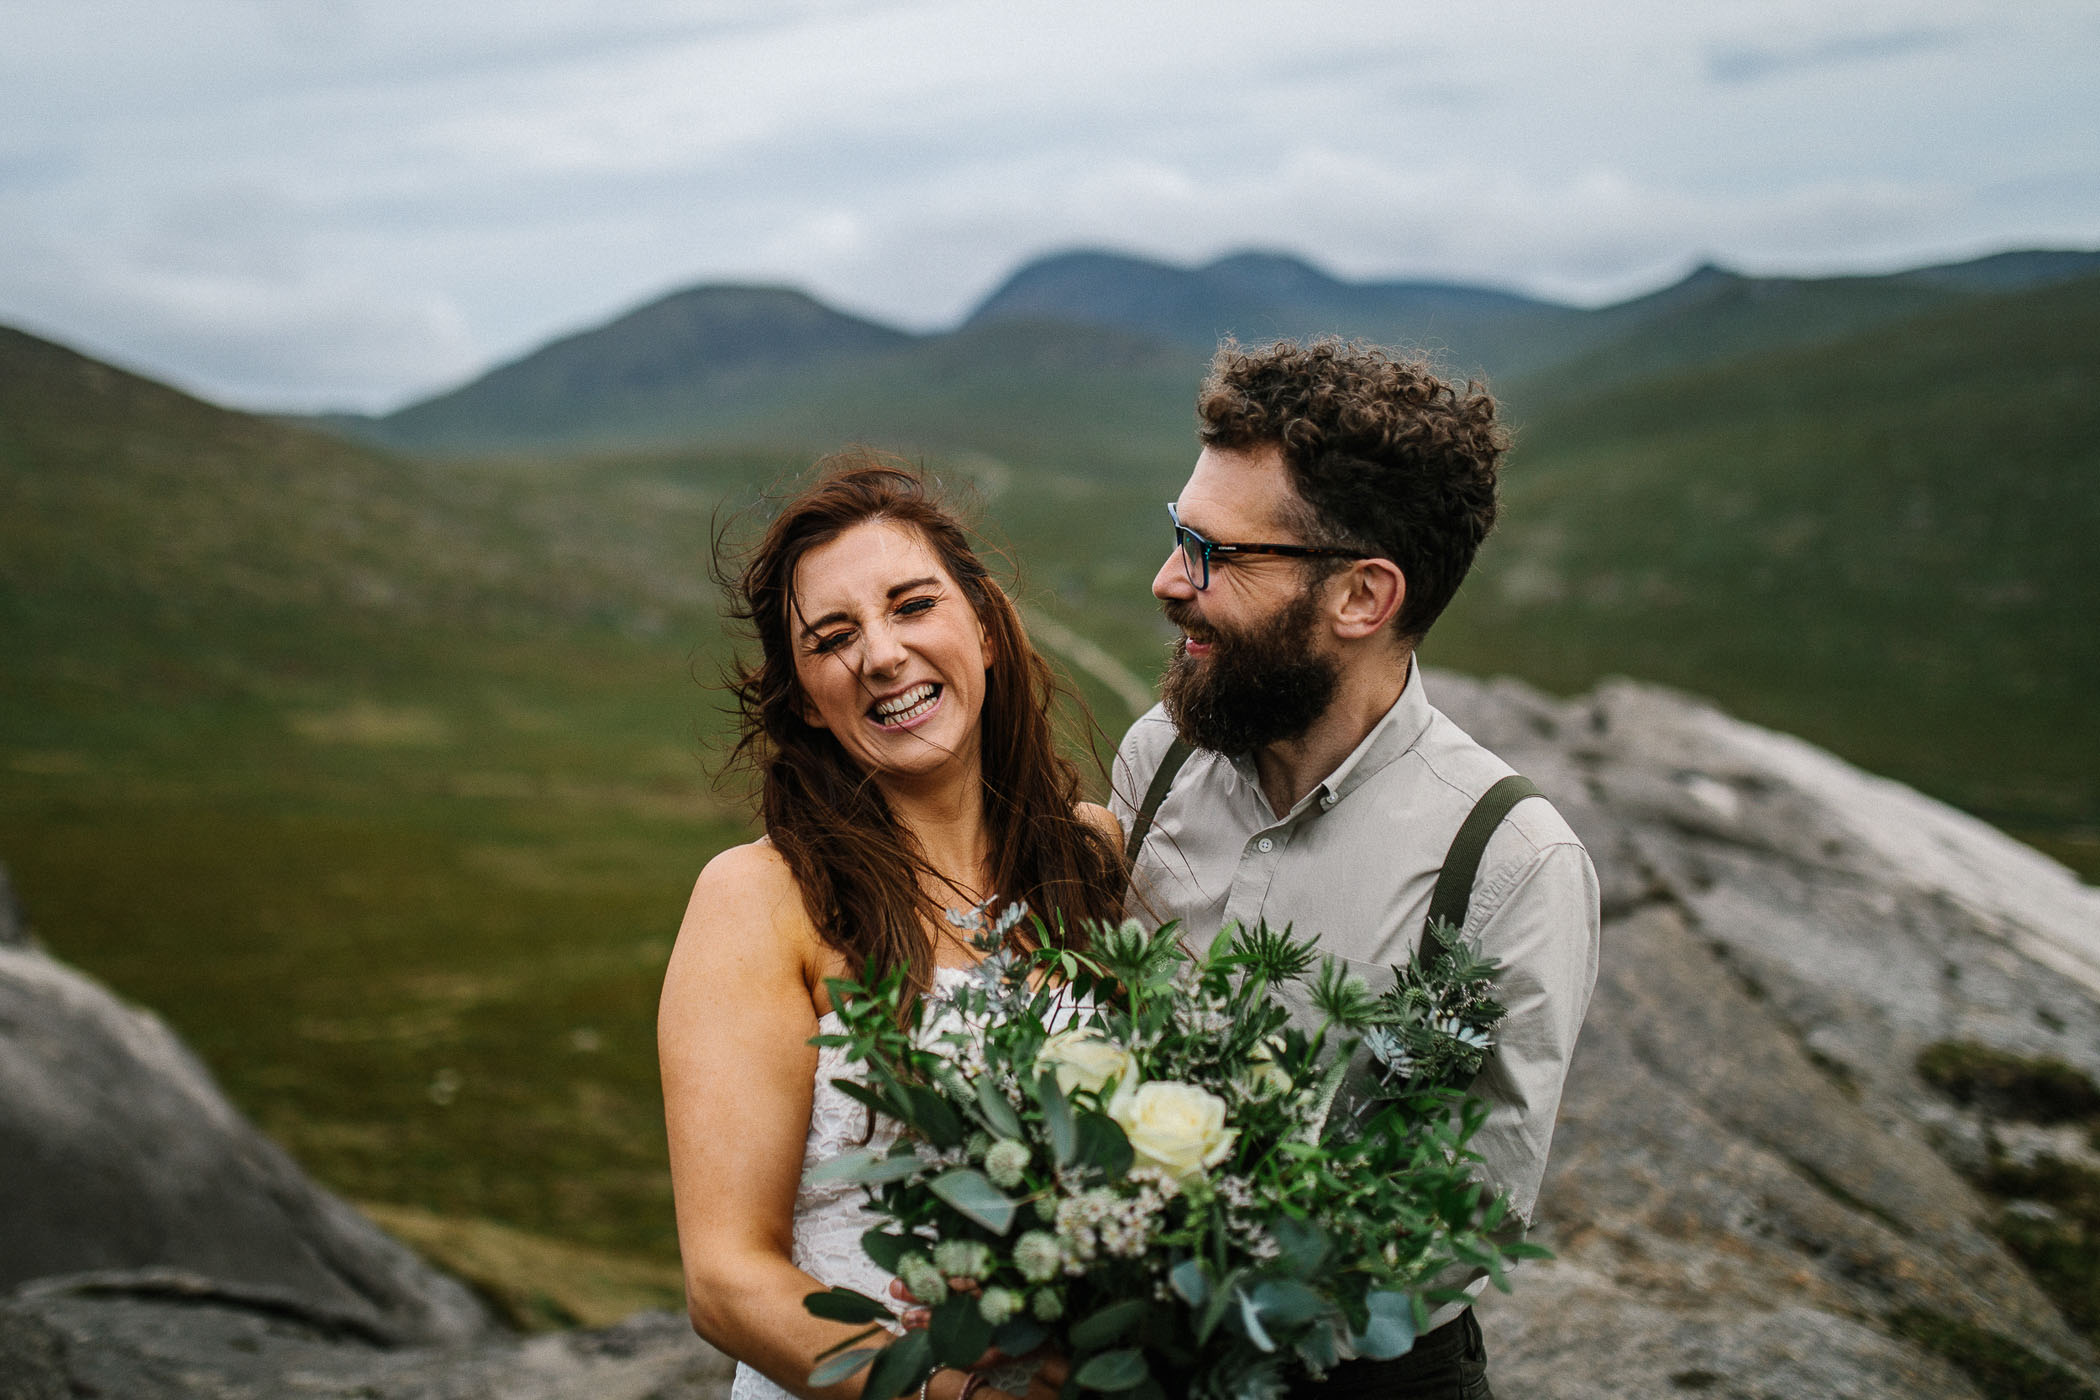 A couple laugh together on their wedding day. They're surrounded by mountains and she's holding a bouquet with lots of greenery. By Luke Flint Photography